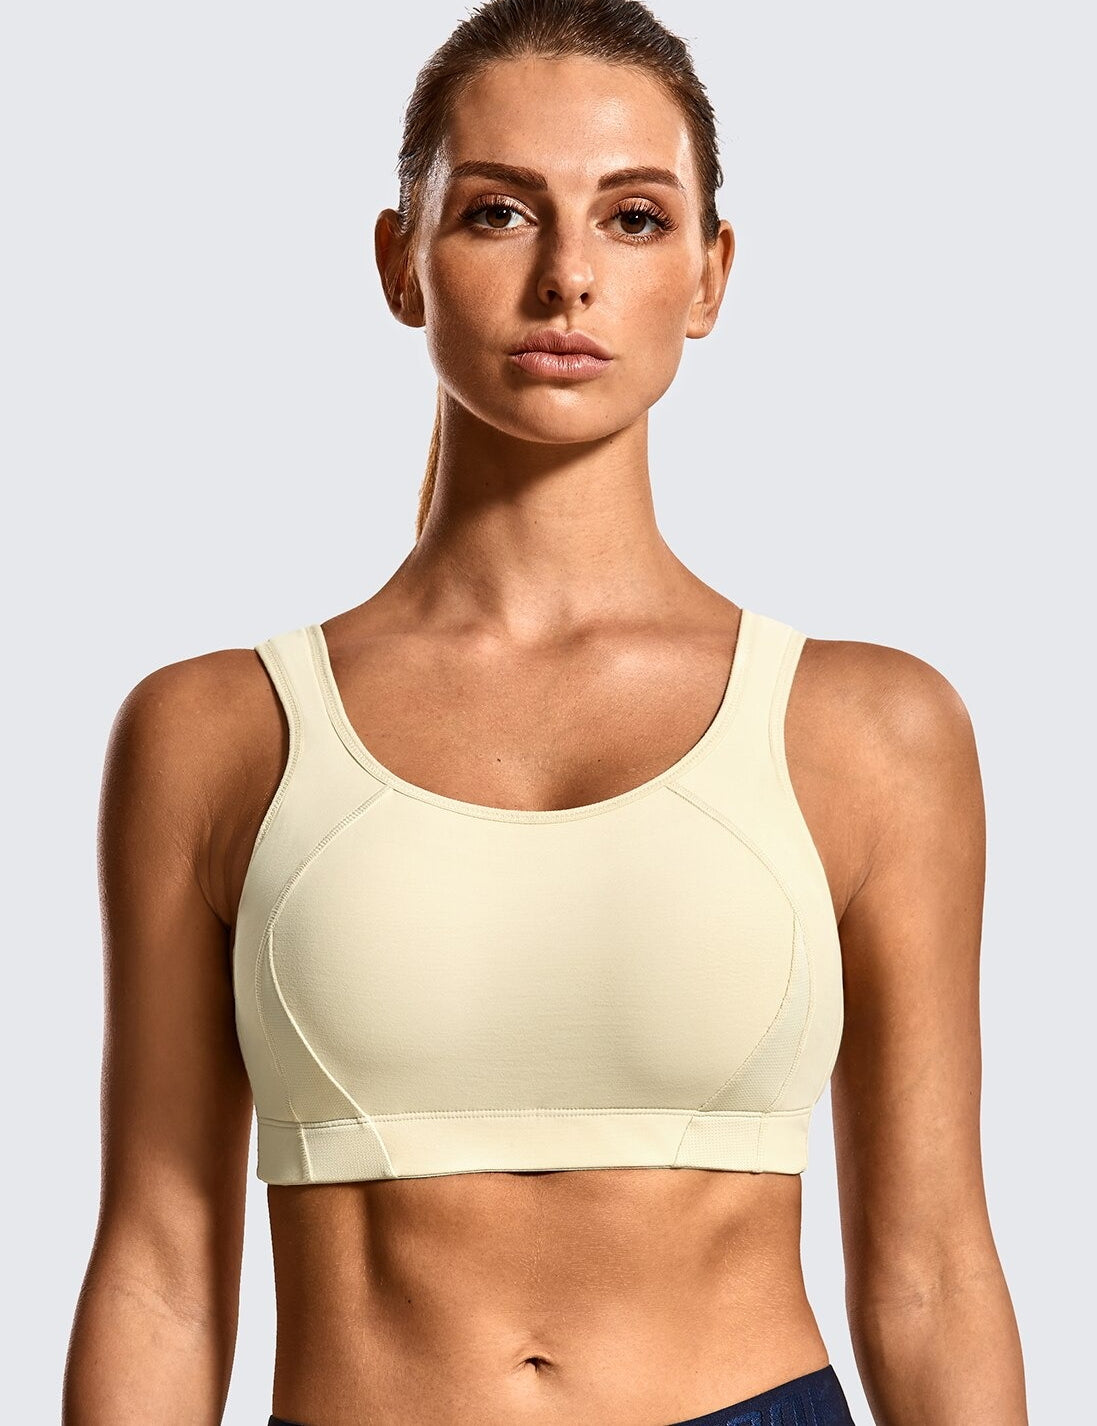 Syrokan Womens Wireless Comfort High Support Workout Sports Bra Size 44C  Navy - $16 - From Danielle